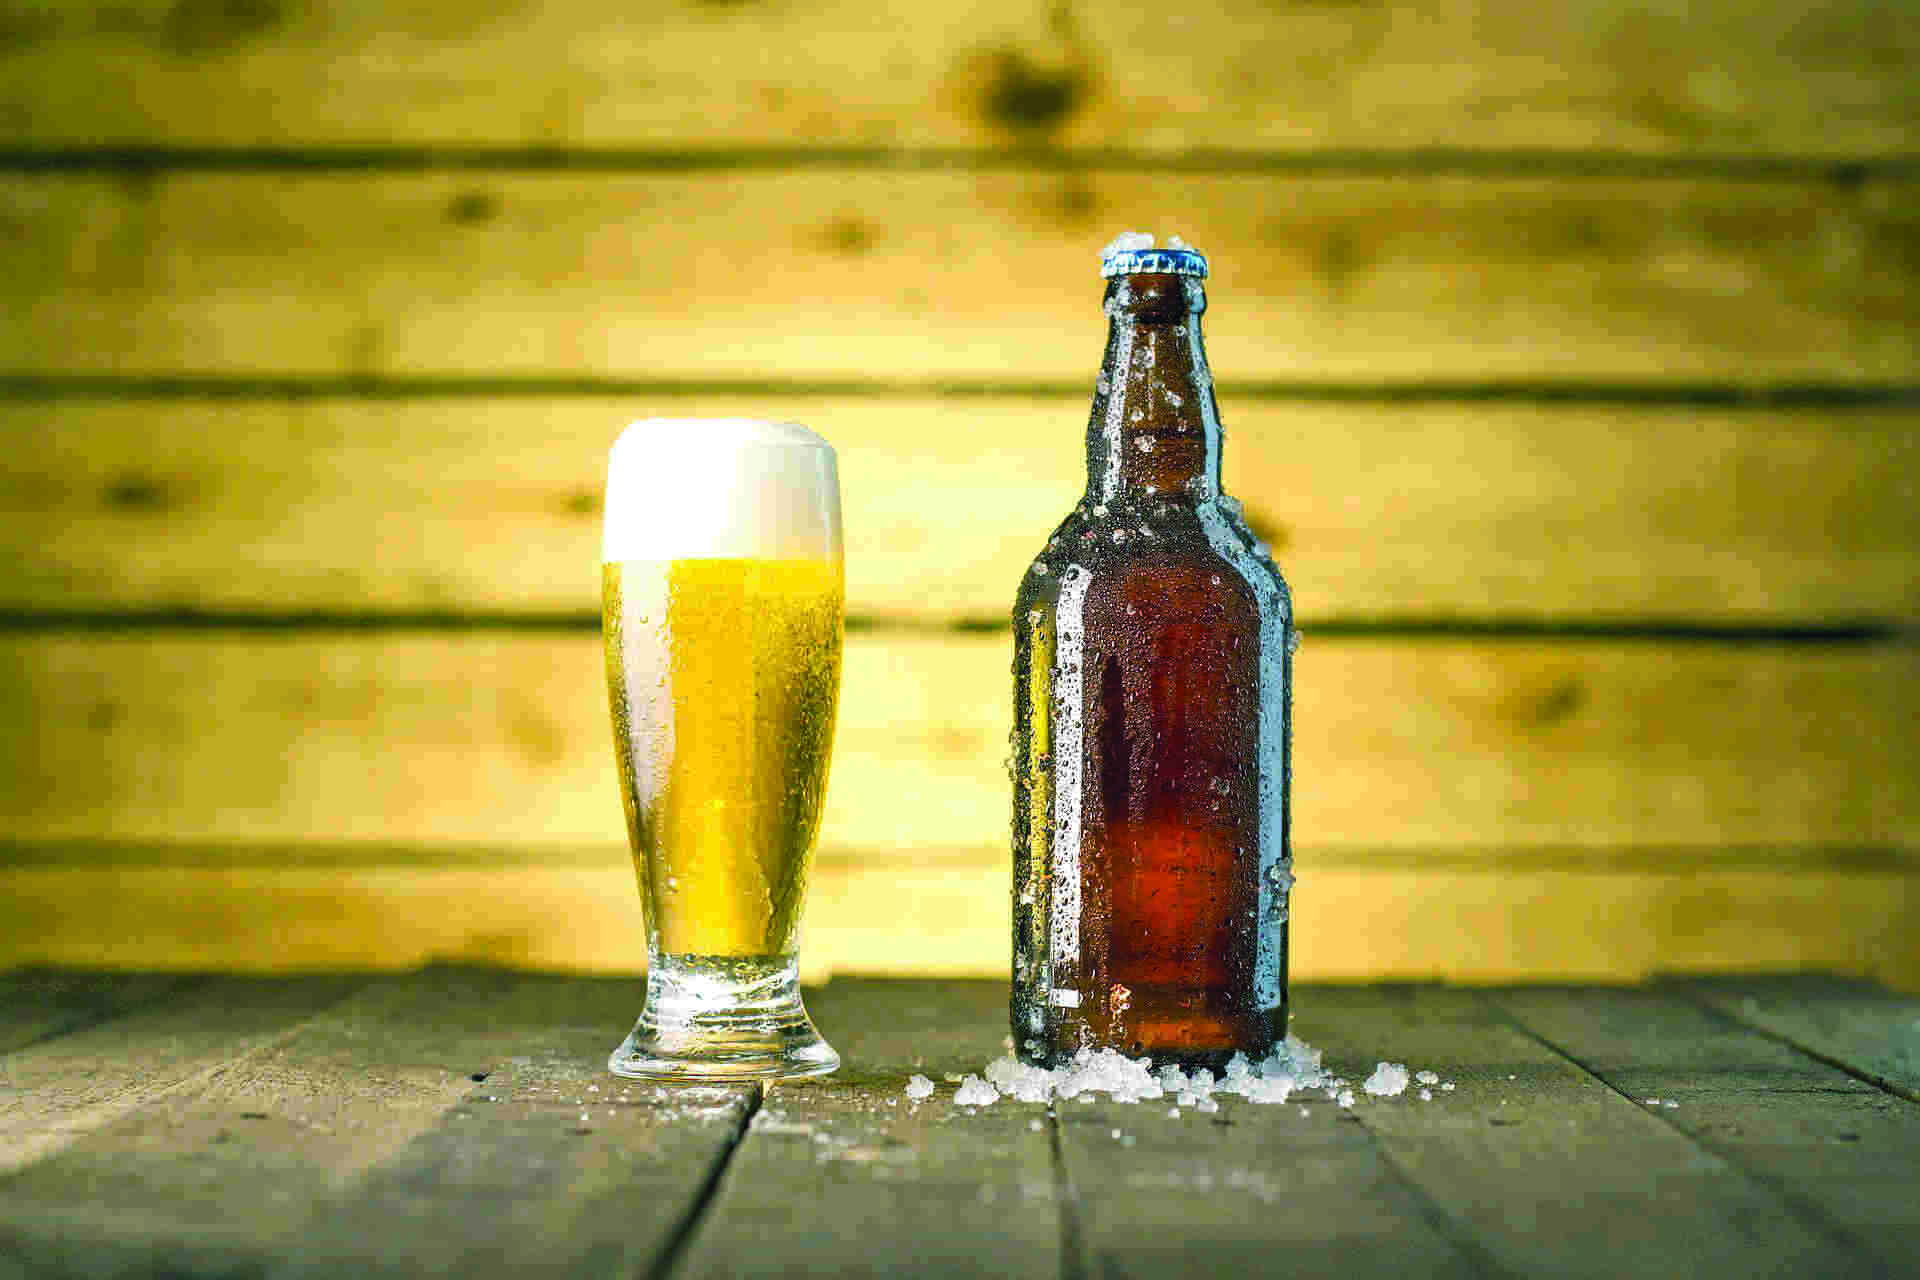 Sale of beer: In 2 months, state earns revenue of Rs 400 crore